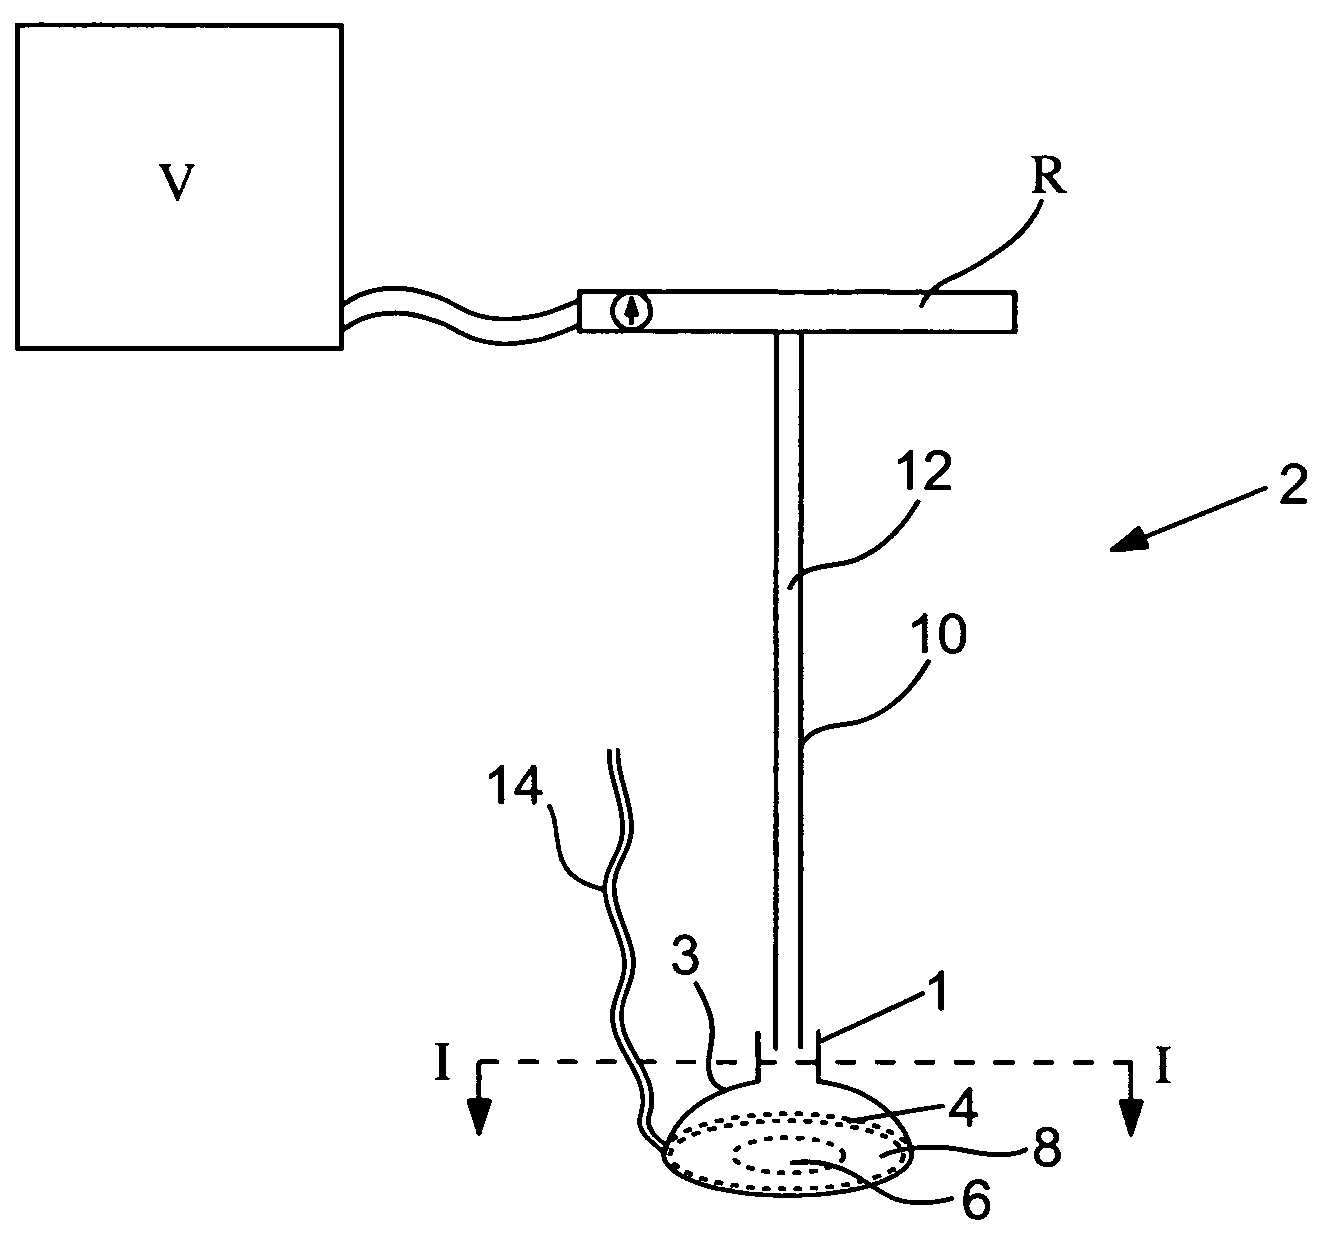 Organ manipulator and positioner and methods of using the same